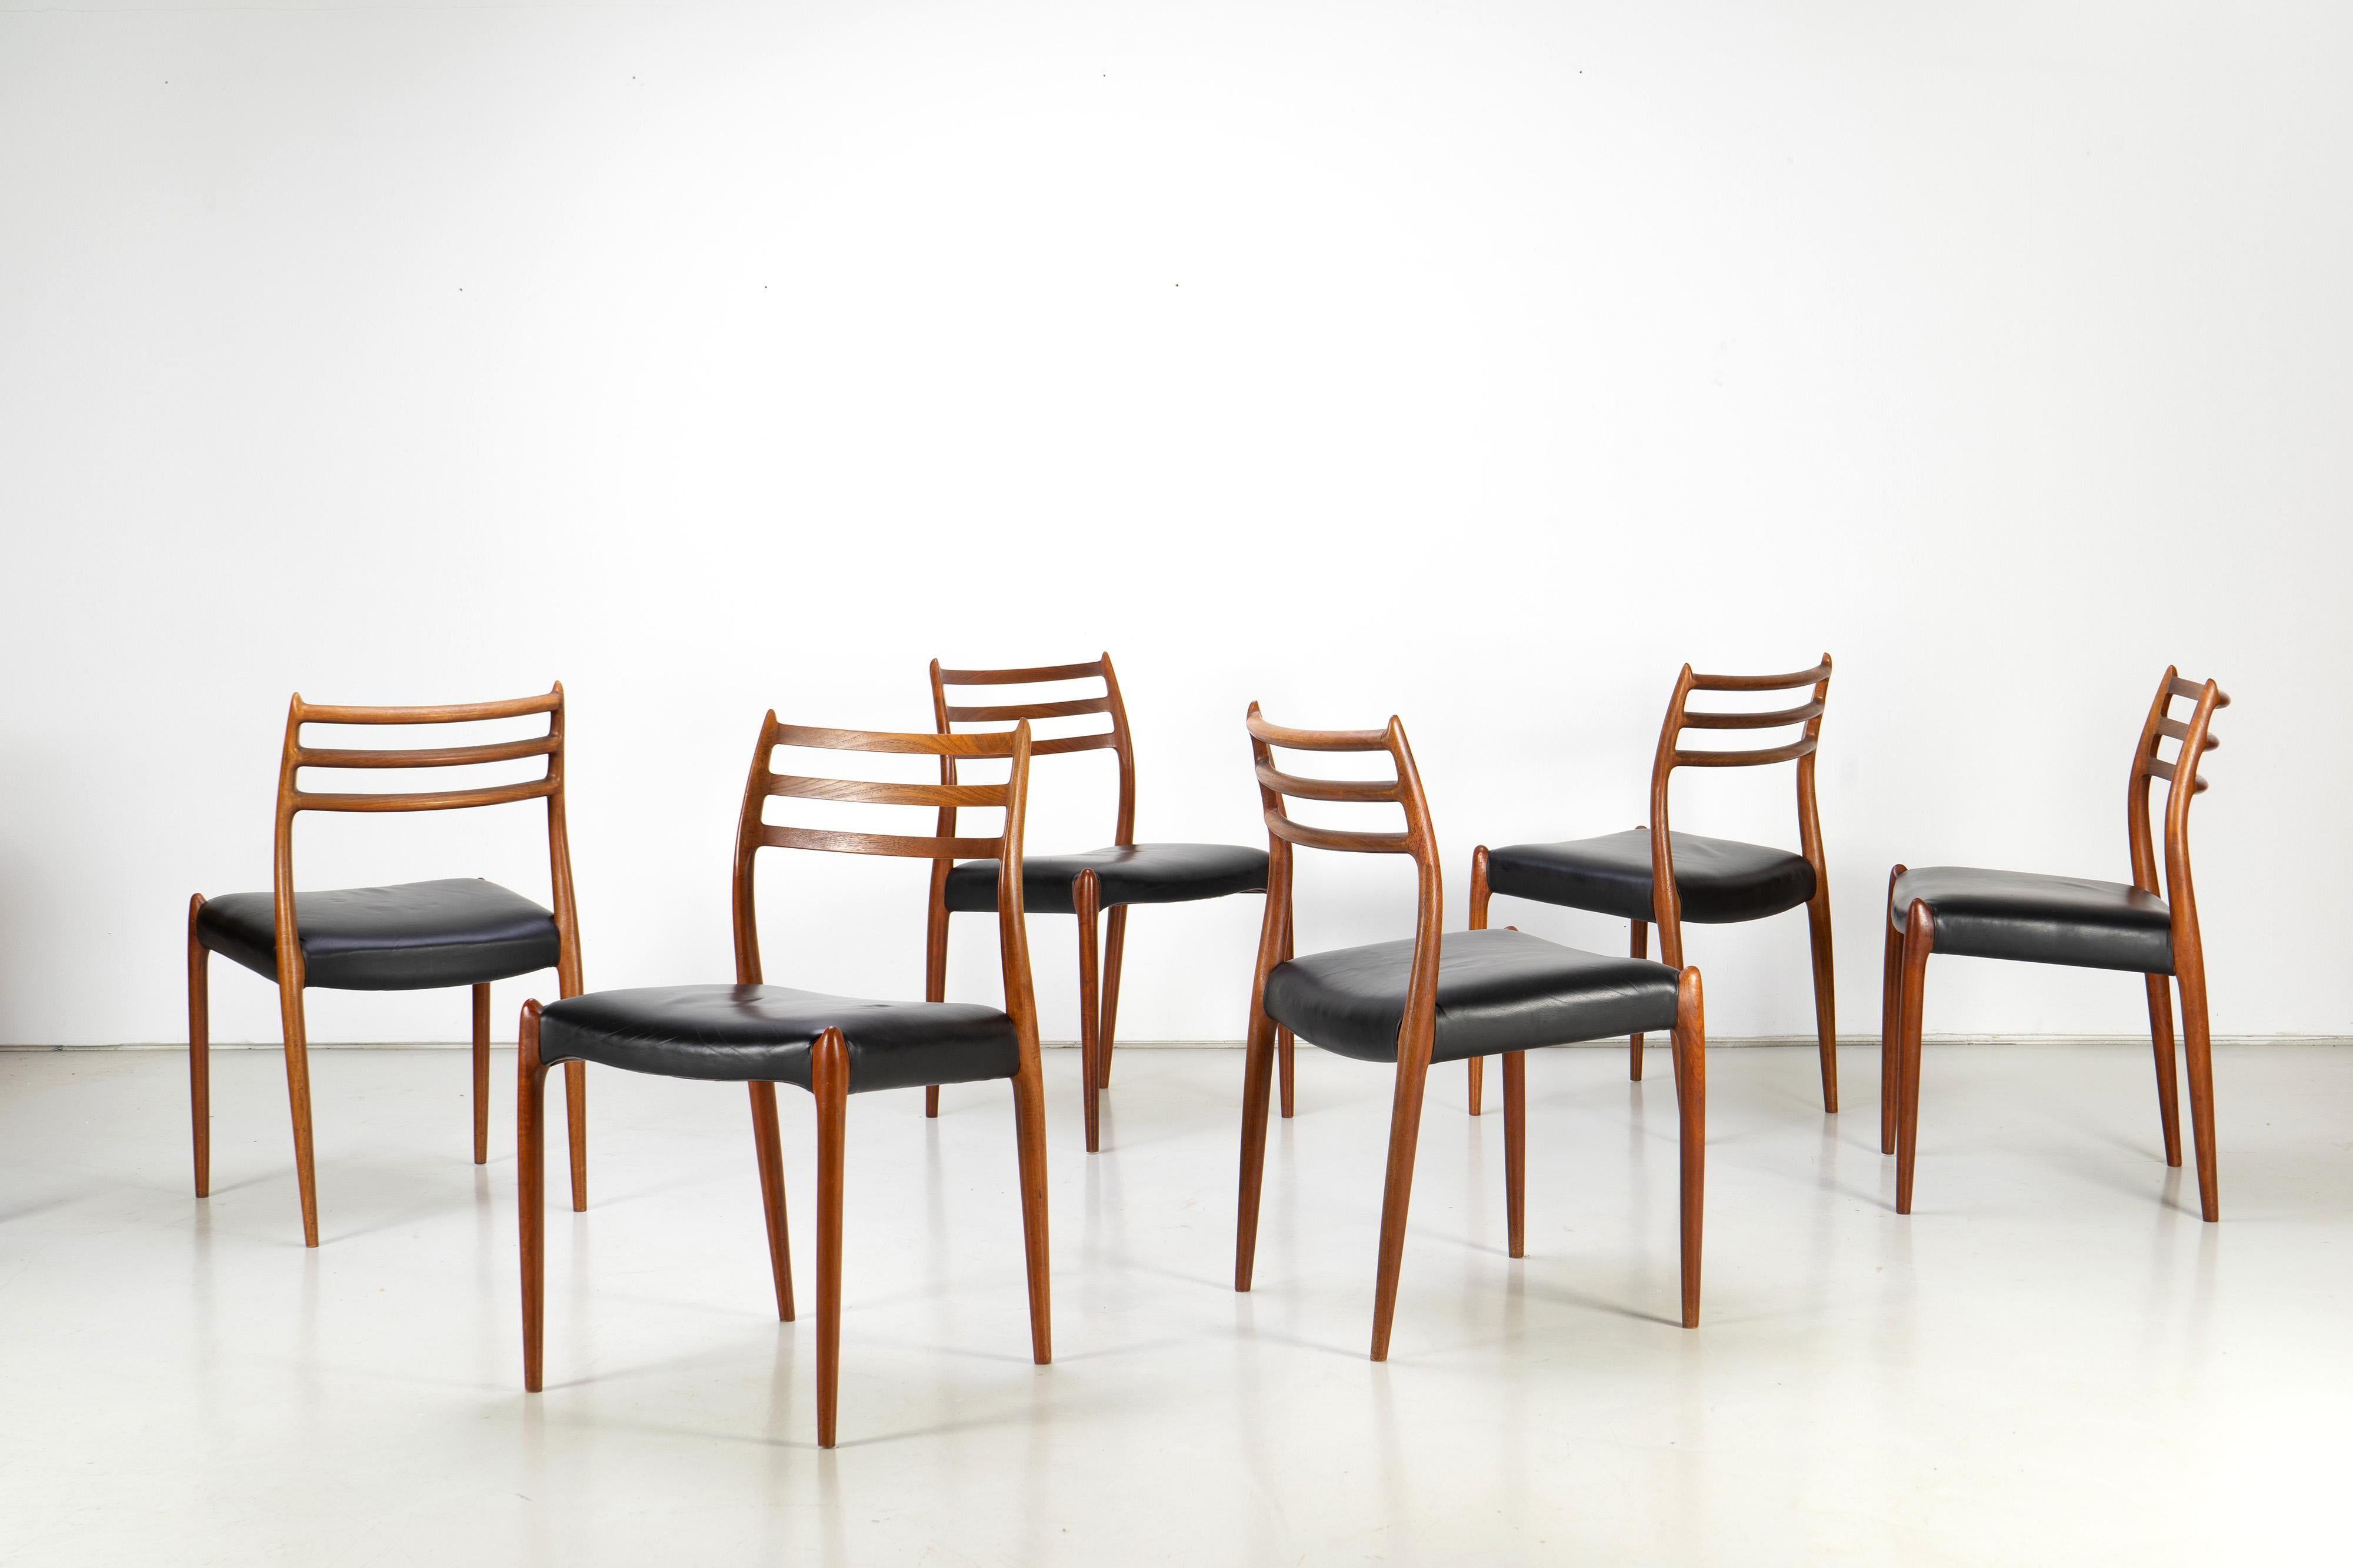 Set of six sophisticated dining chairs designed by Niels O. Møller. All chairs are of premium quality. The organic frames are made of real teakwood, upholstered with leather.